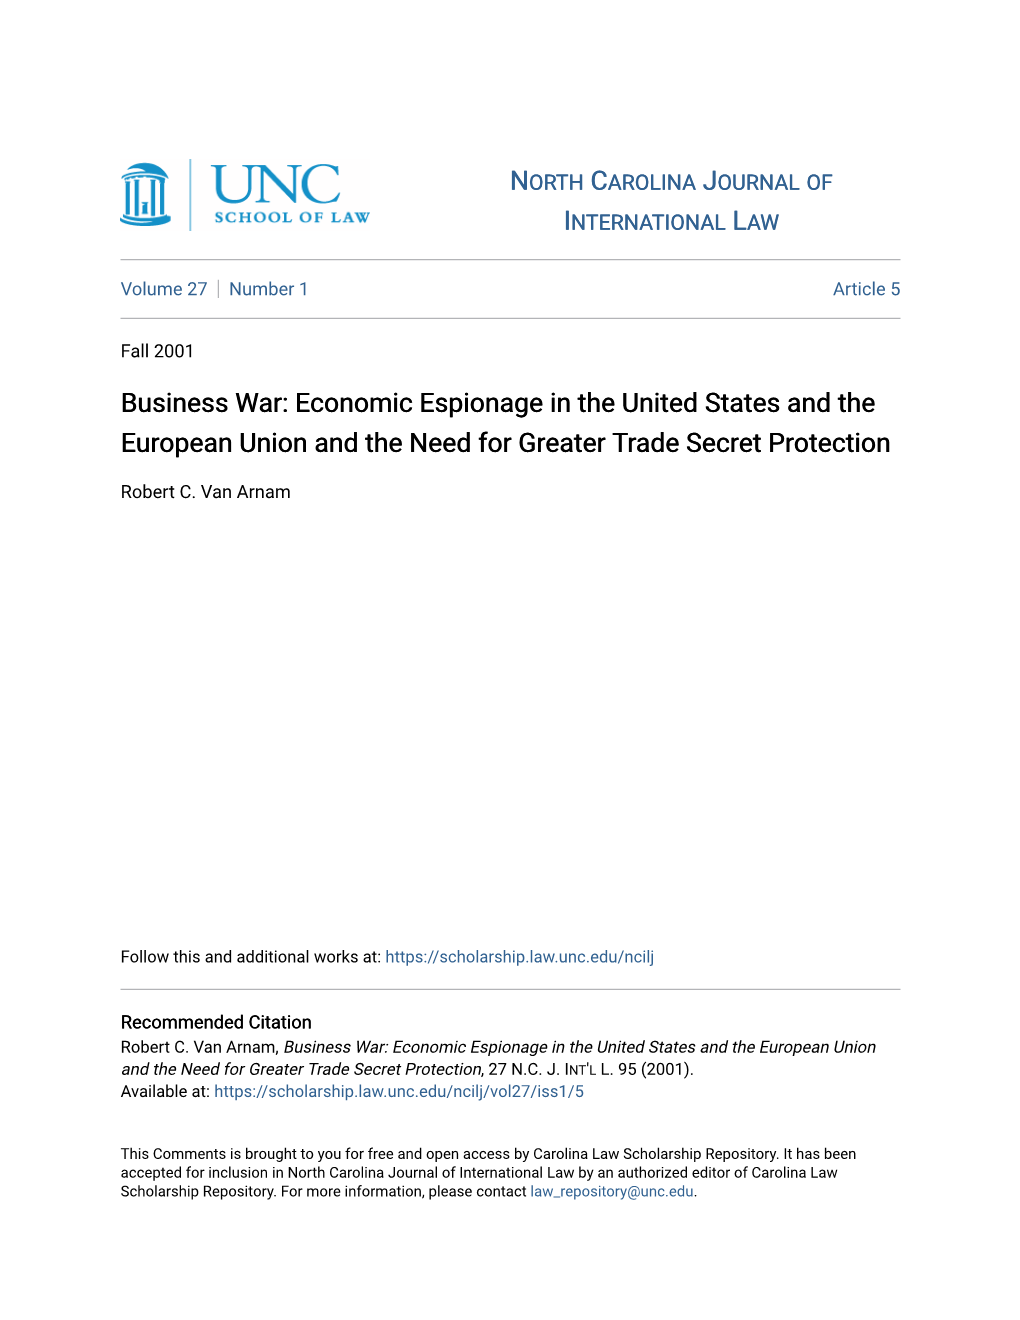 Economic Espionage in the United States and the European Union and the Need for Greater Trade Secret Protection